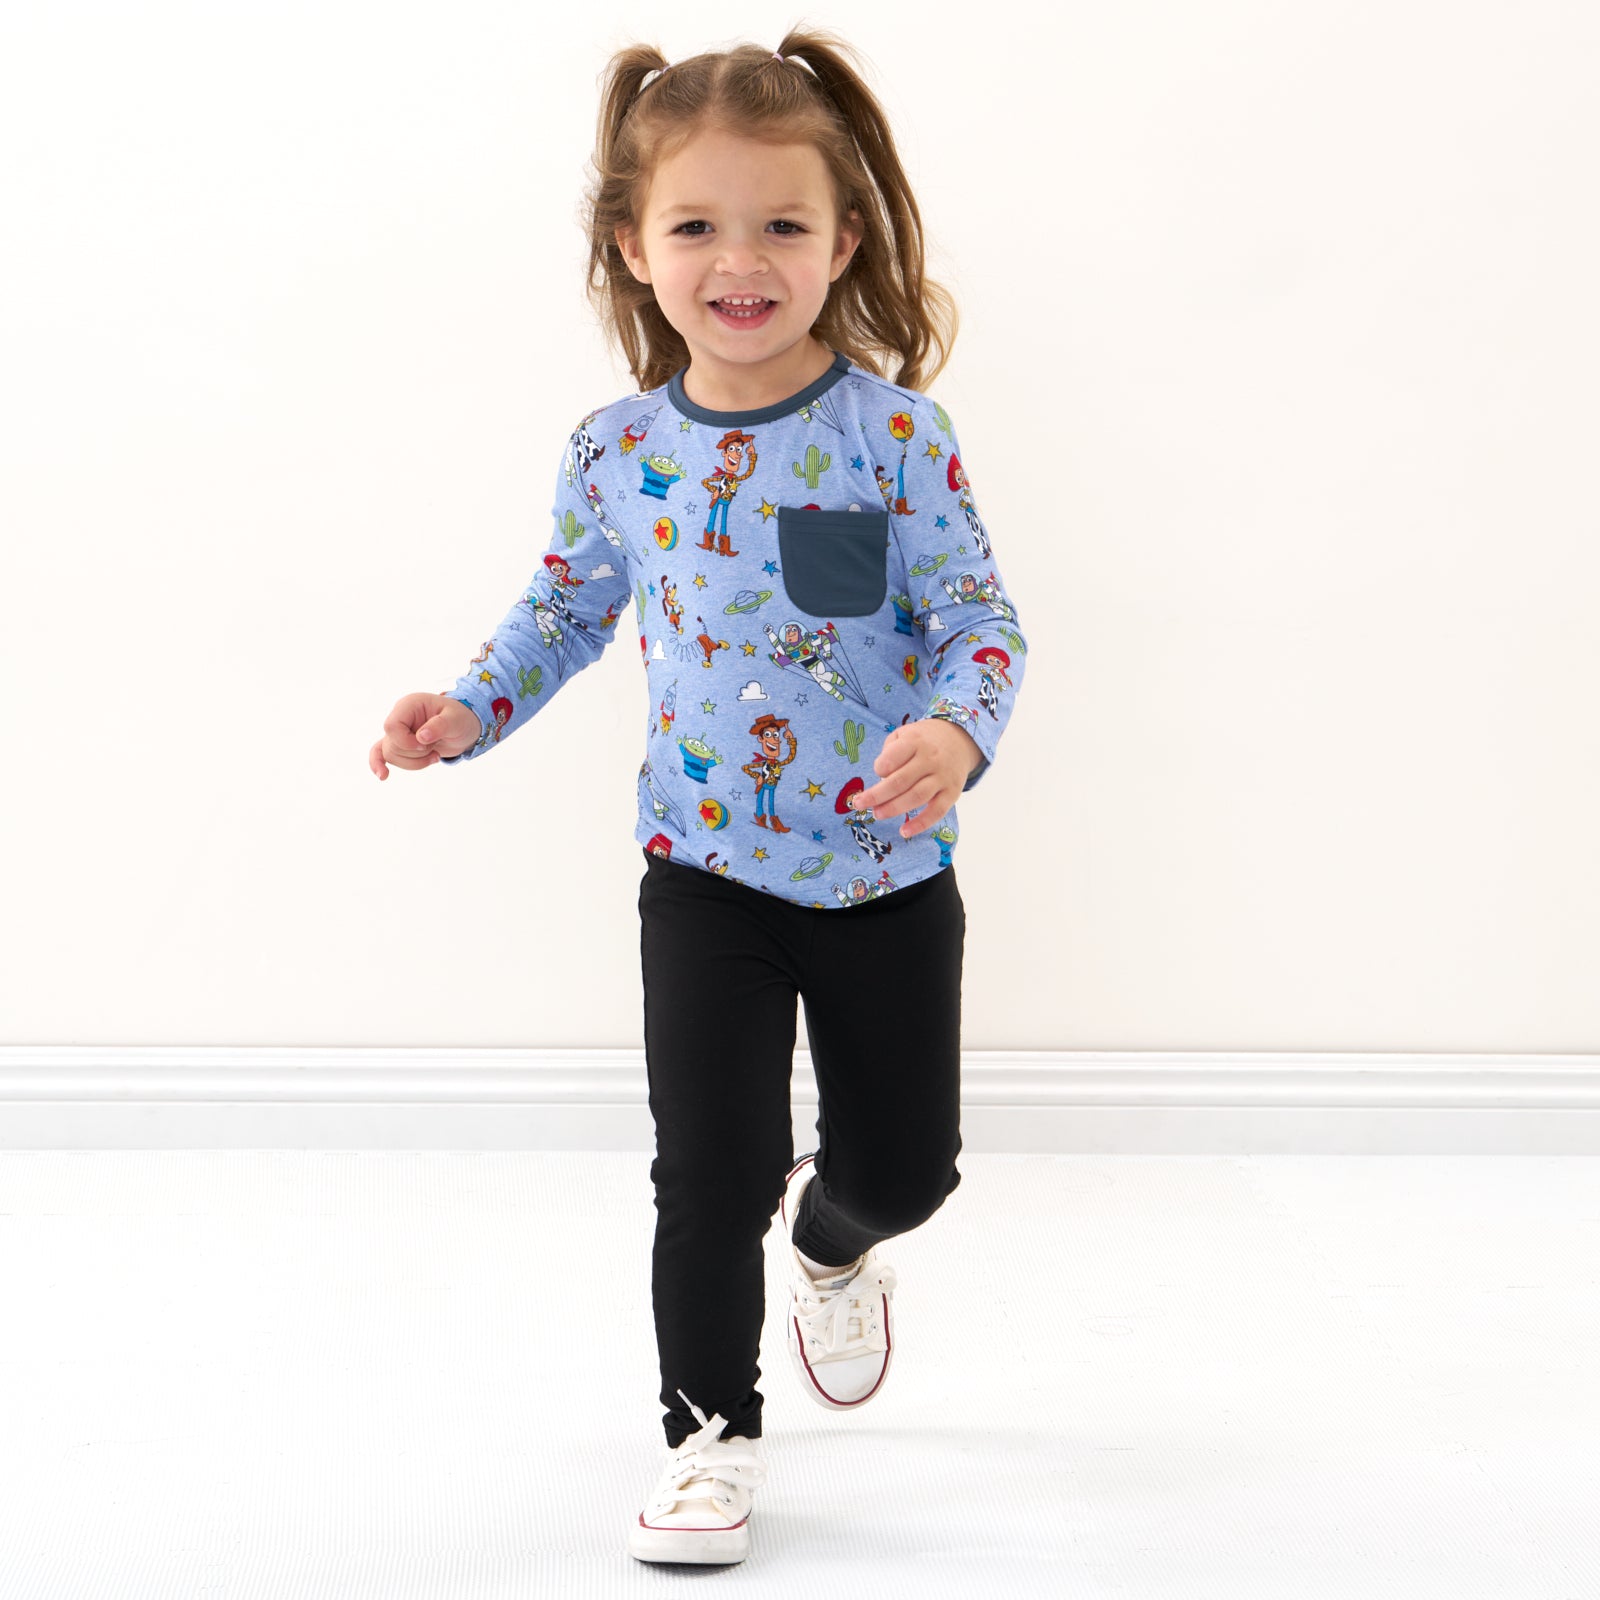 Child wearing a Disney Pixar Toy Story Pals pocket tee and coordinating leggings